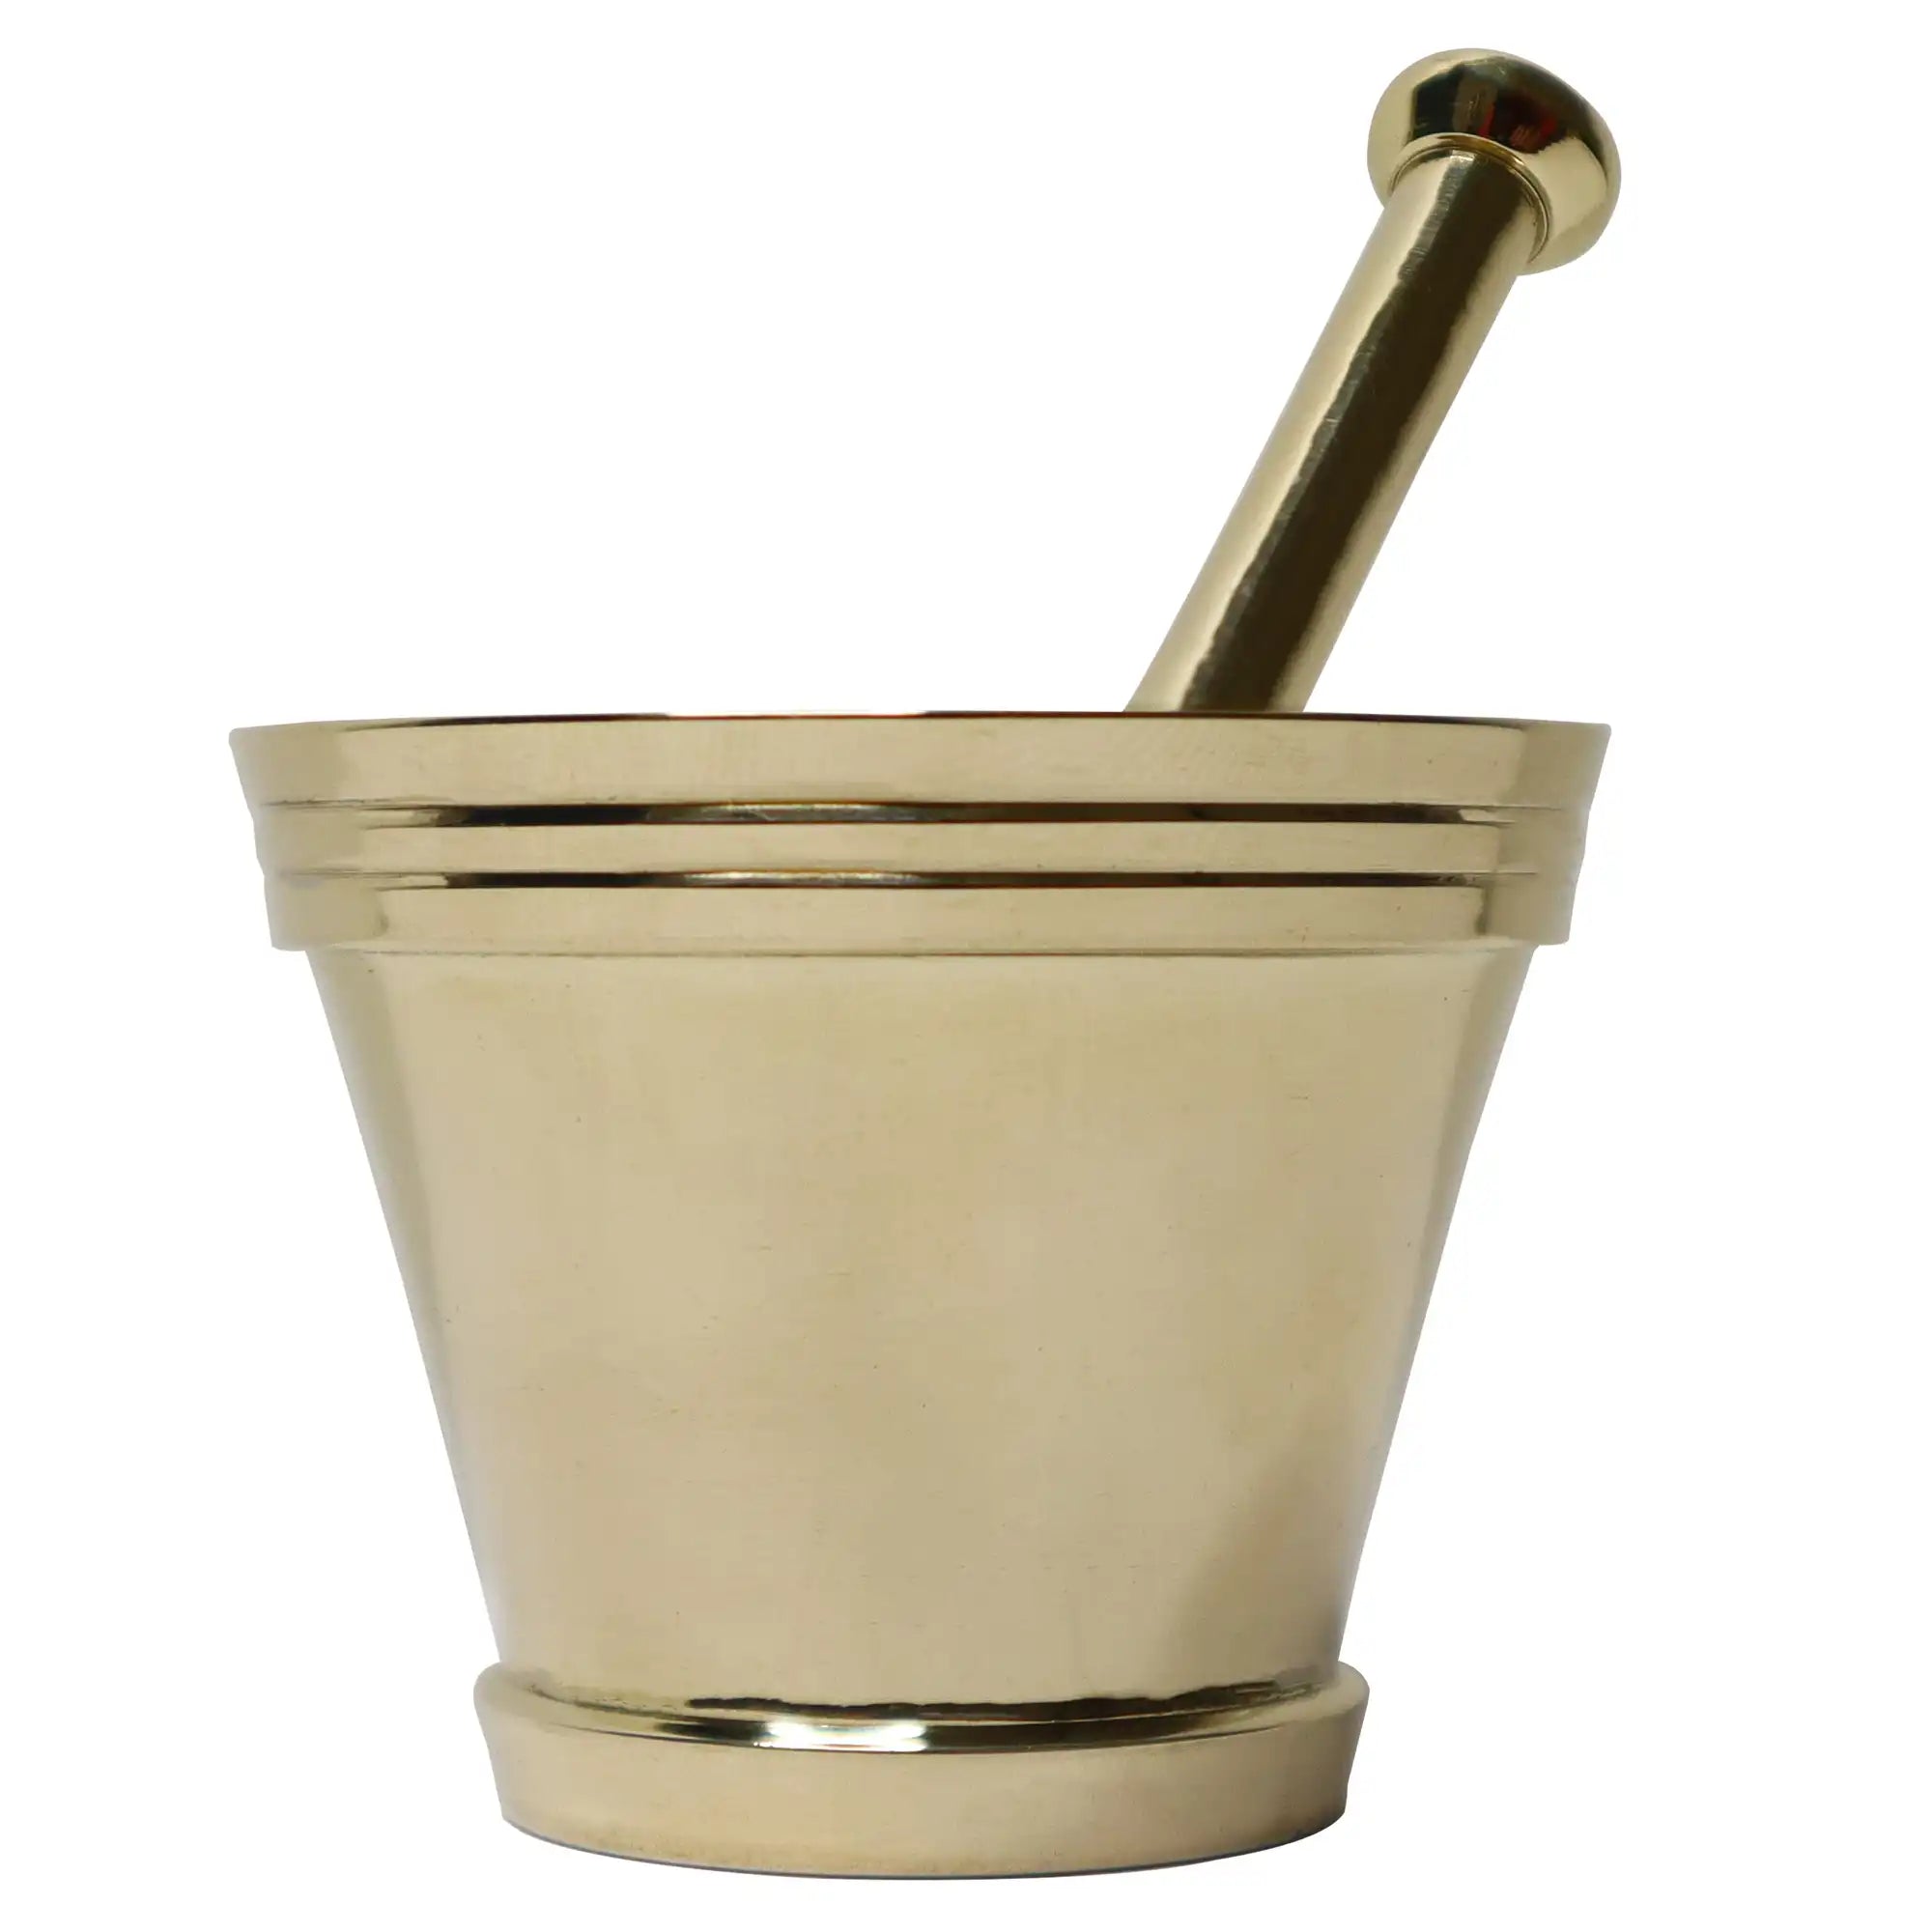 Brass Mortar and Pestle | Mortar and Pestle | Kitchen Essentials | Spice Grinding Tool | Traditional Spice Grinder | Healthy Kitchen Tool